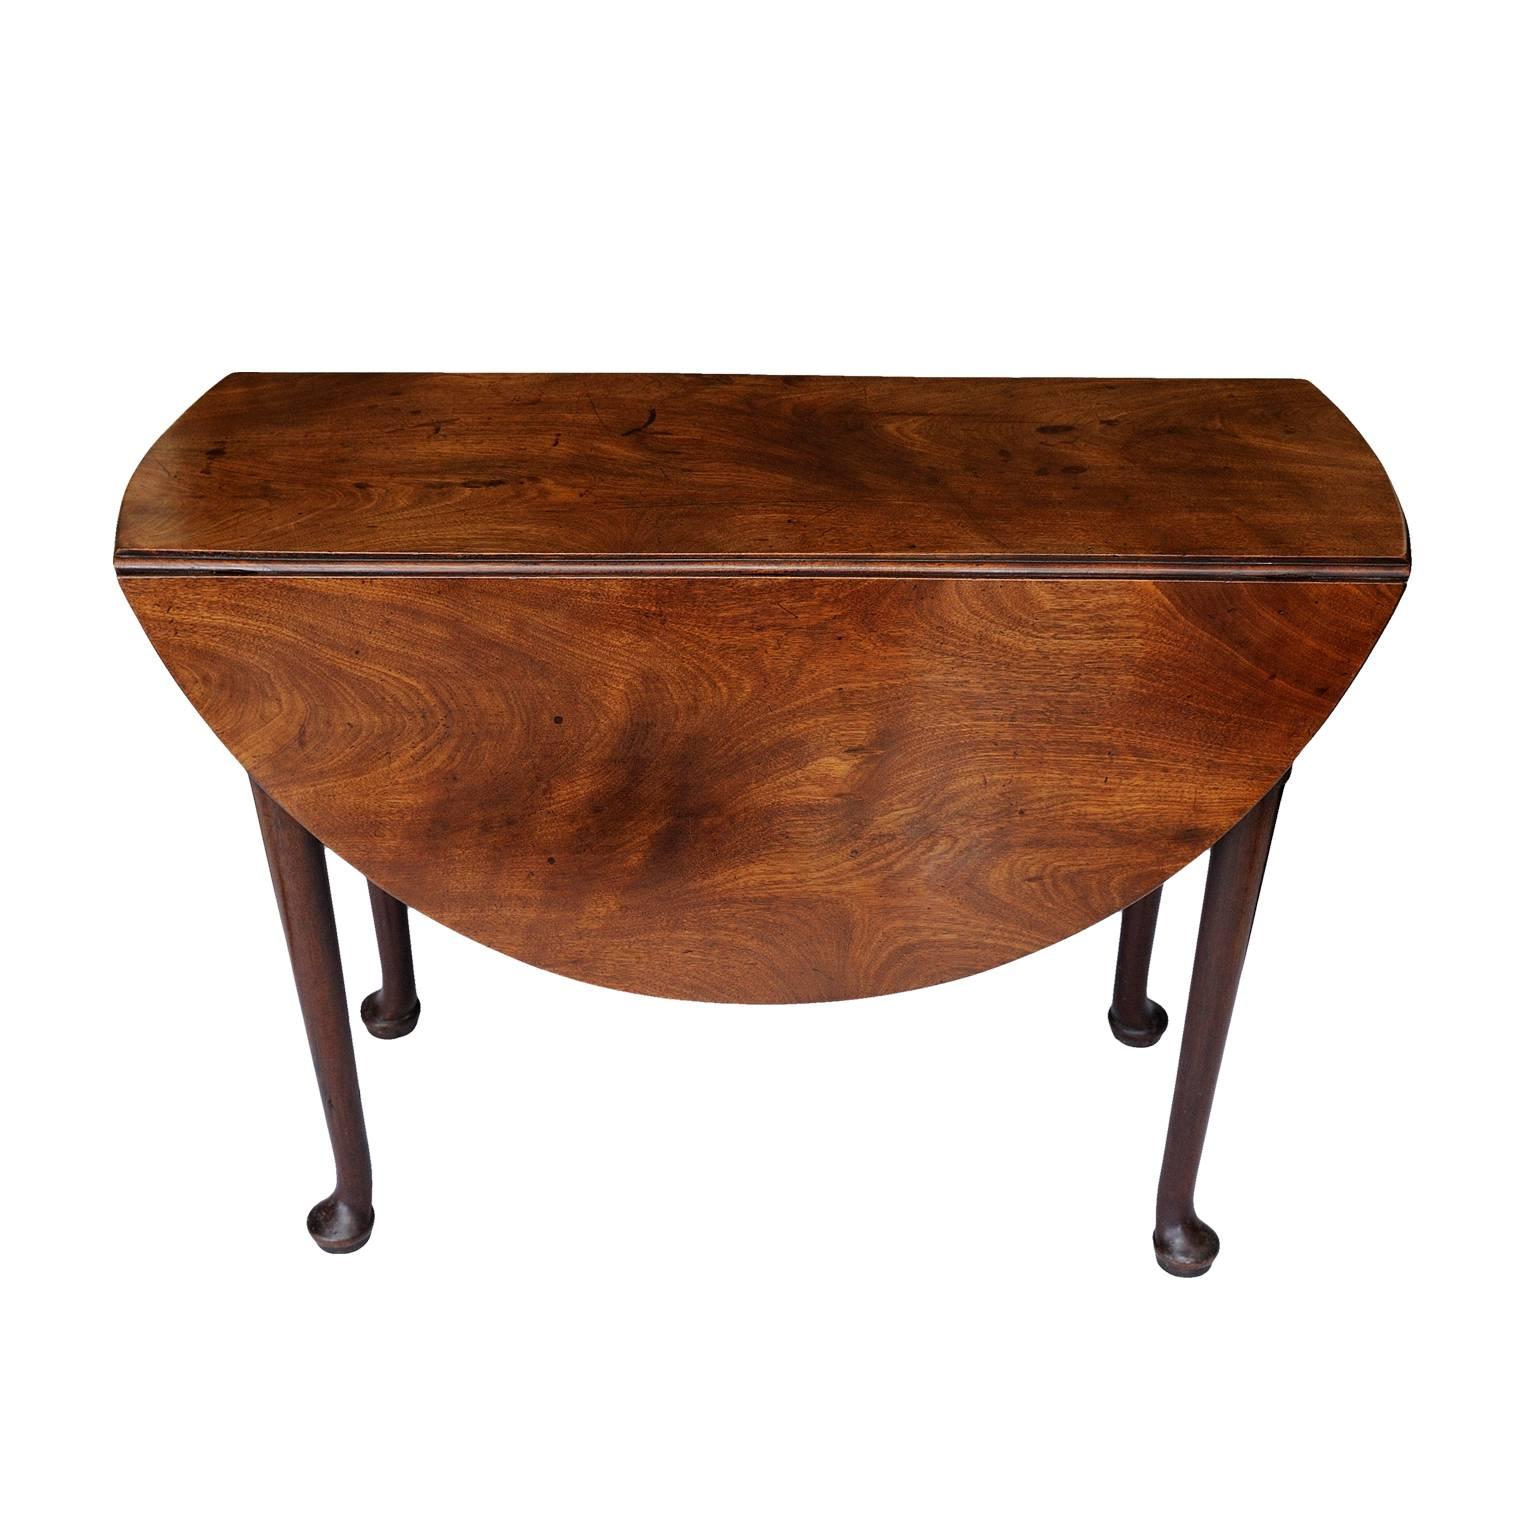 This is a very pretty George II mid-18th century Cuban mahogany drop-leaf pad foot table, the mahogany displays great colour, circa 1750.